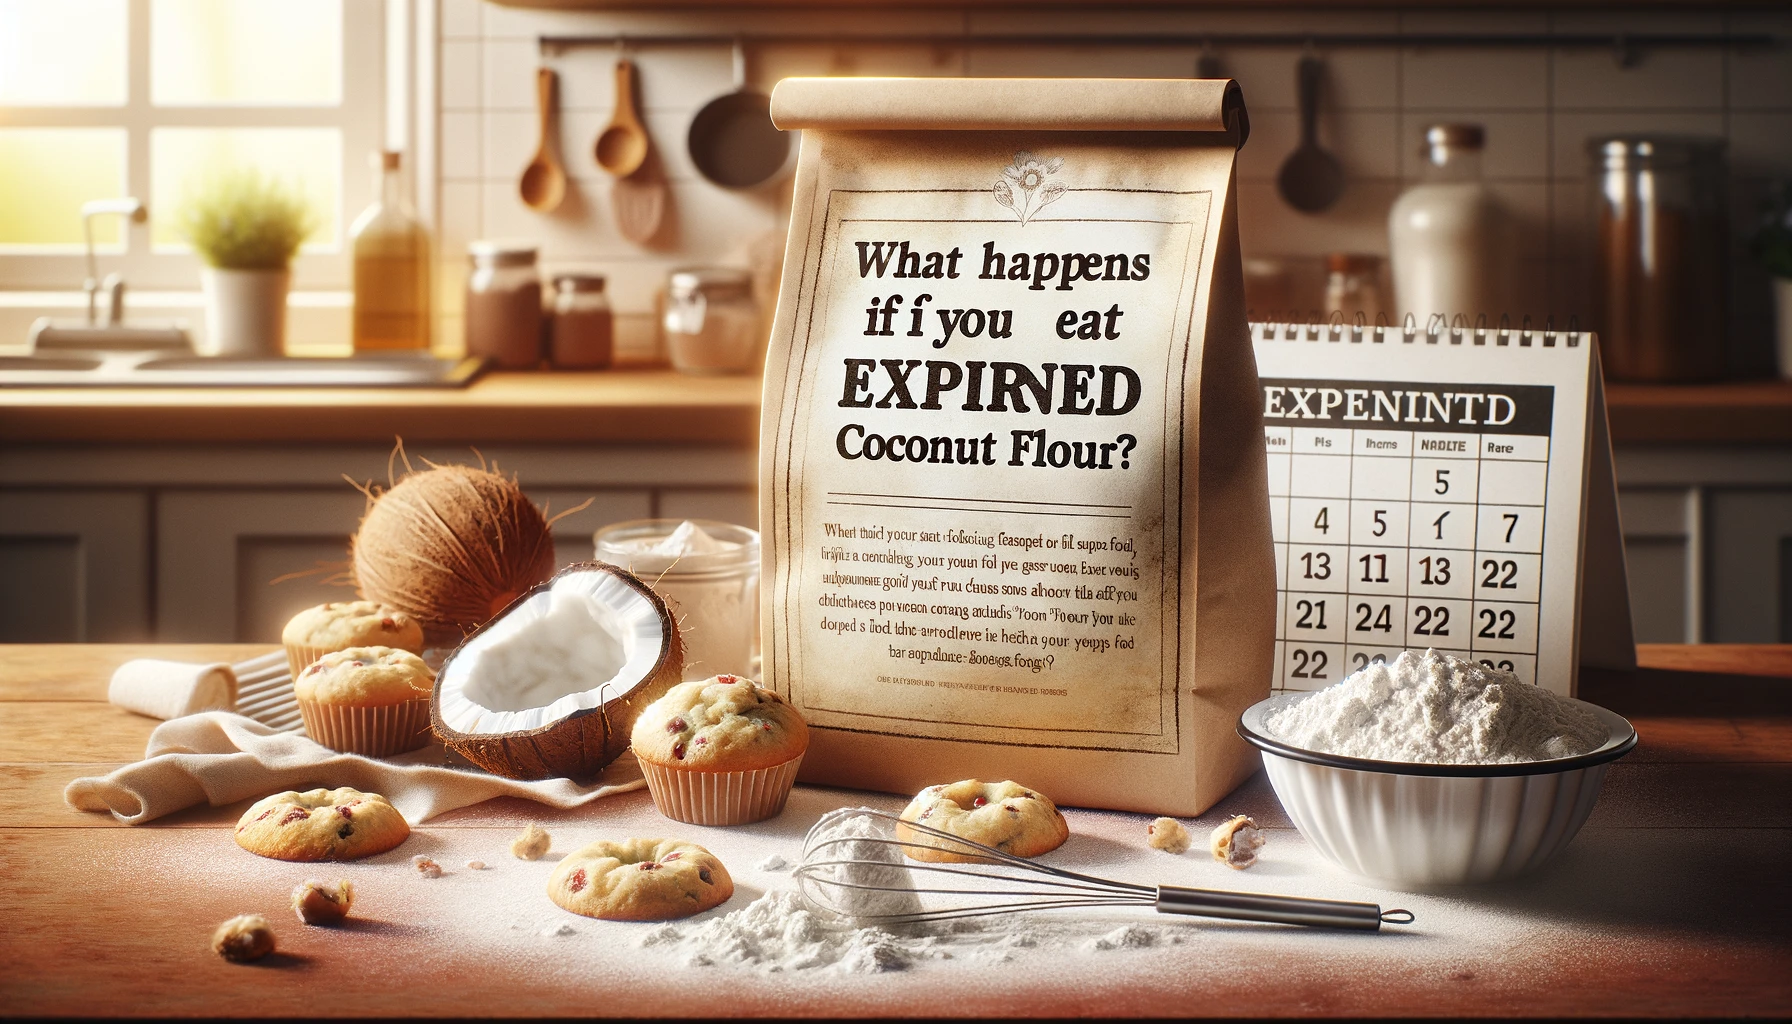 blog featured image for the post about expired coconut flour